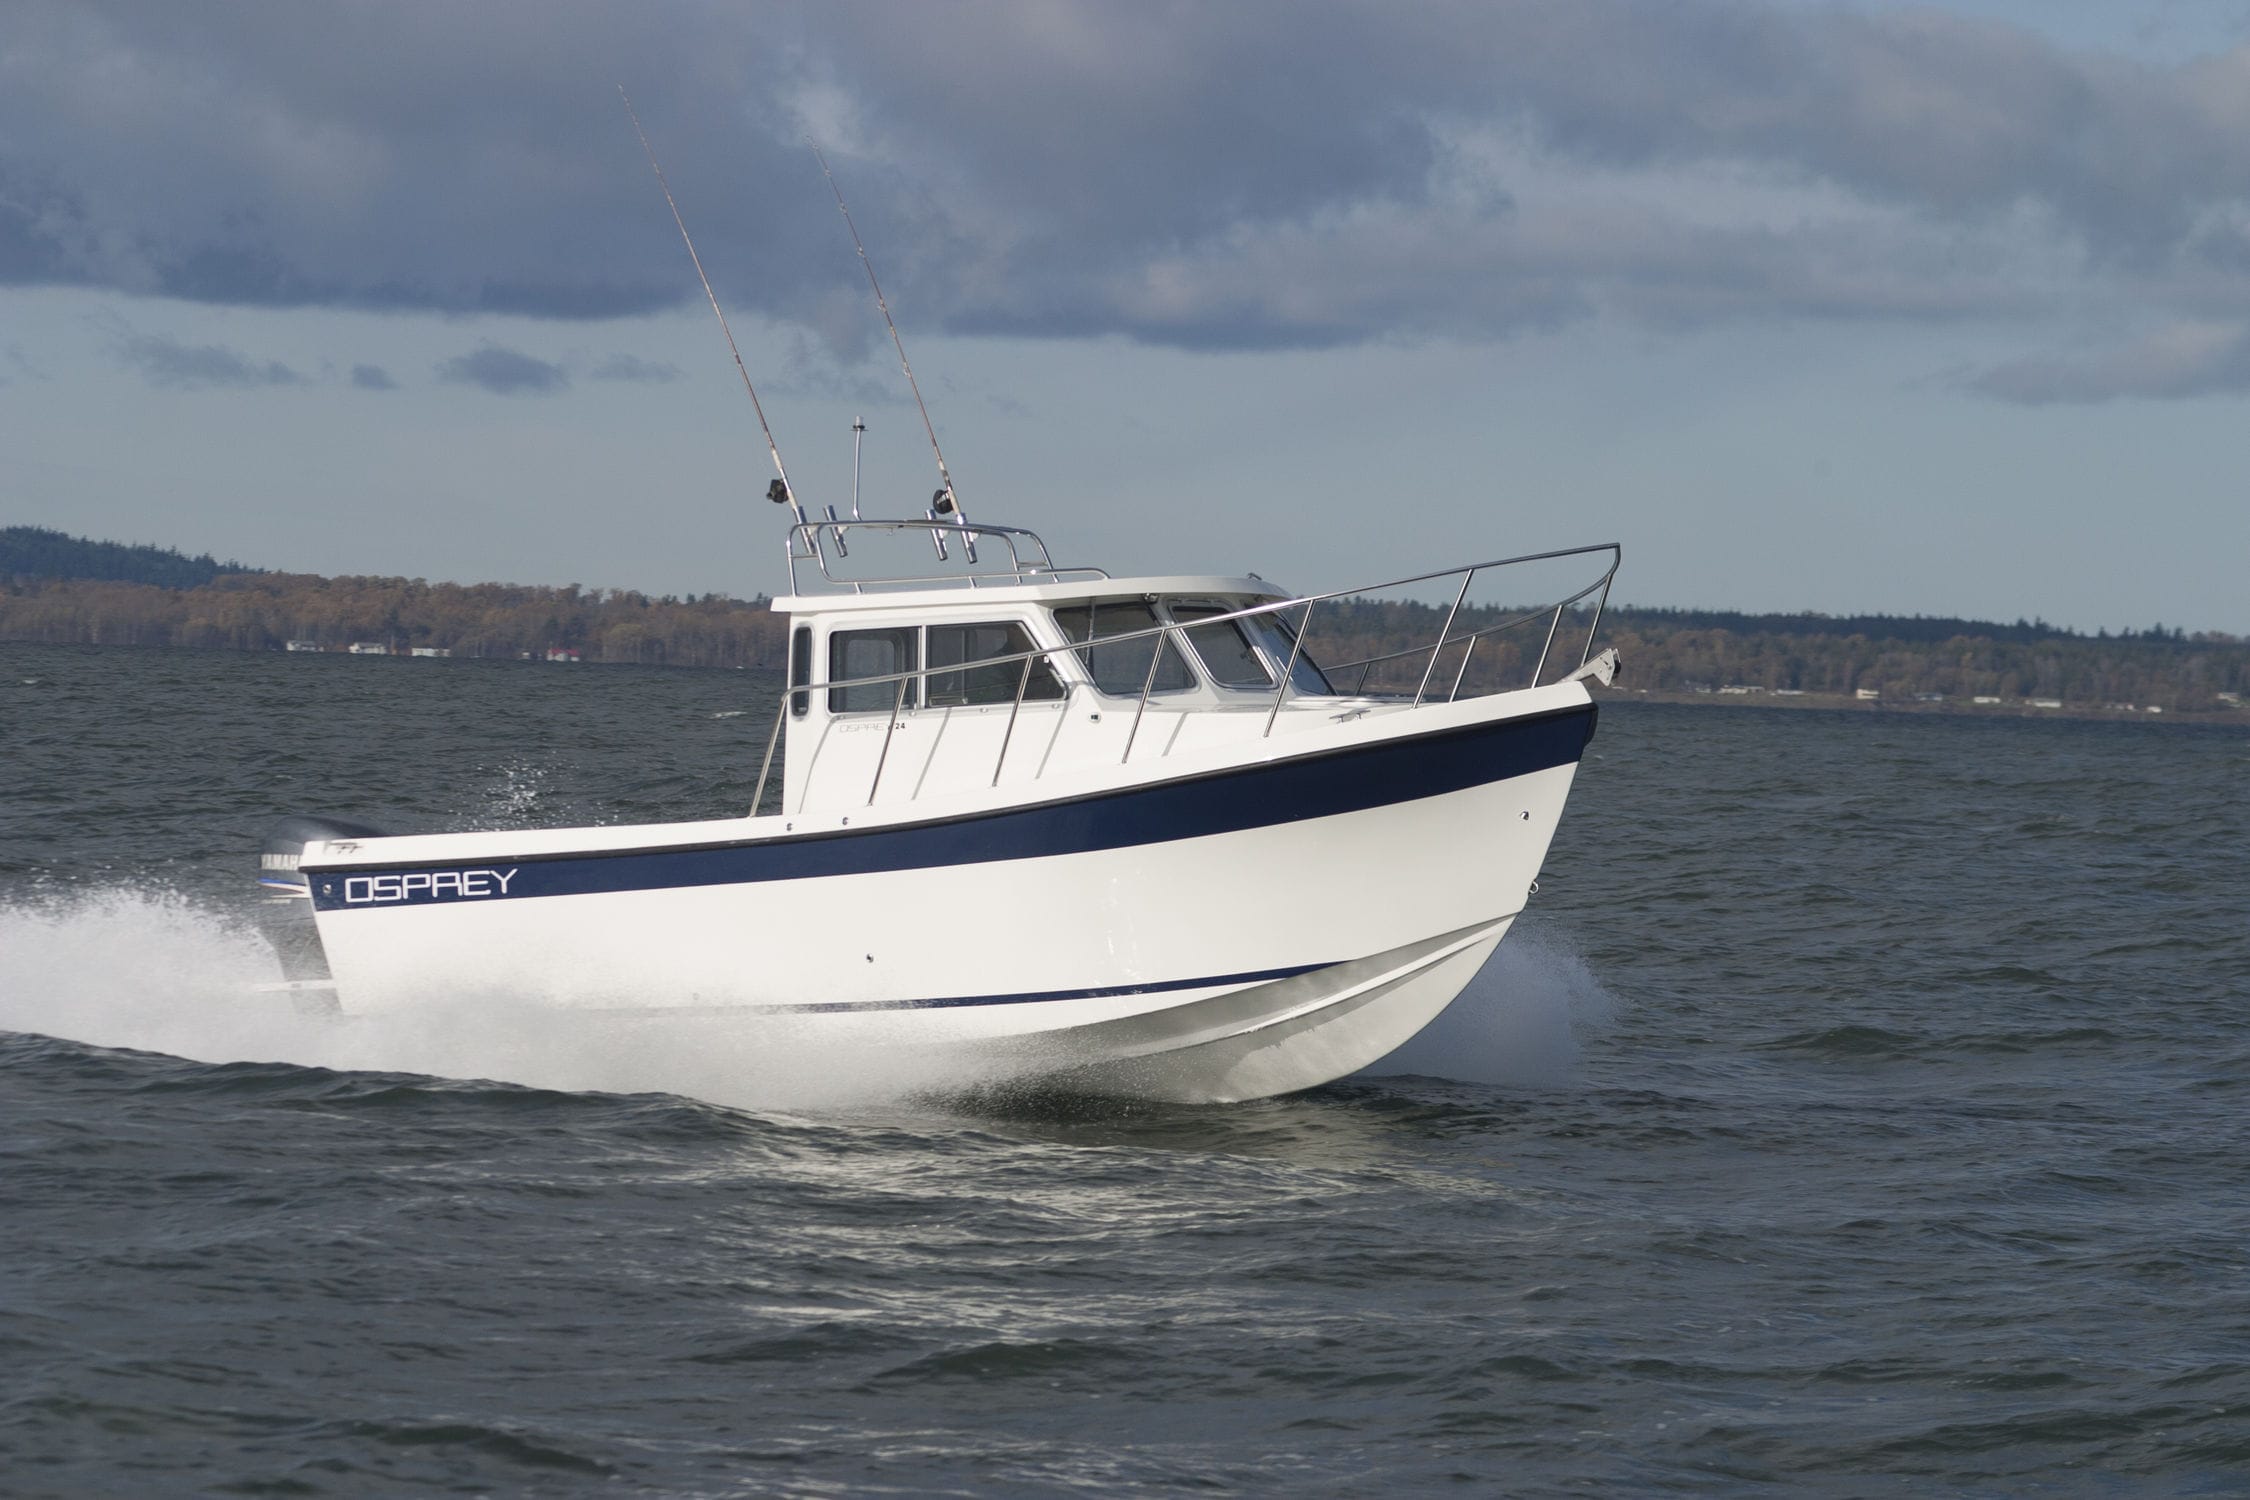 Outboard day fishing boat - 24 FISHERMAN - Osprey Pilothouse Boats